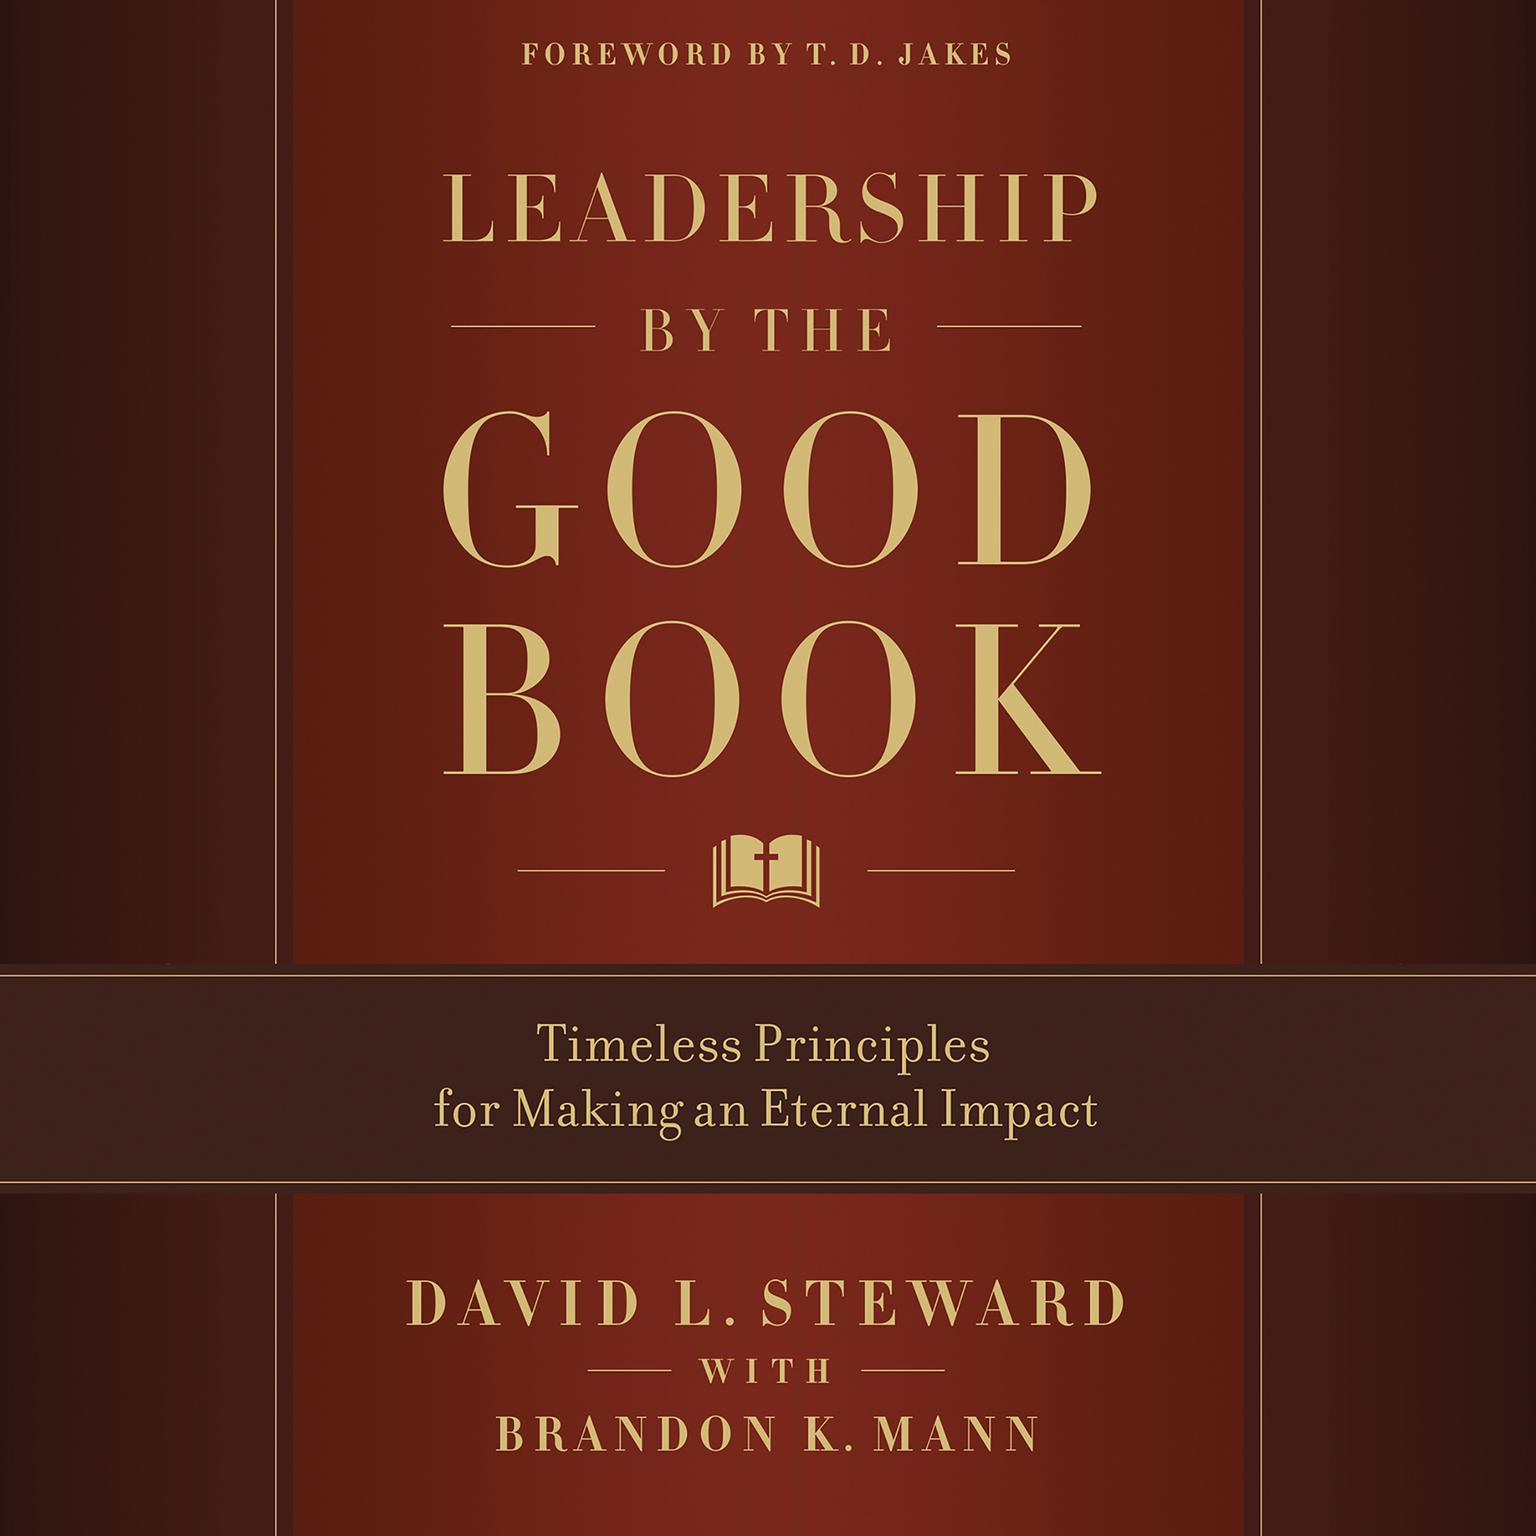 Leadership by the Good Book: Timeless Principles for Making an Eternal Impact Audiobook, by David L. Steward